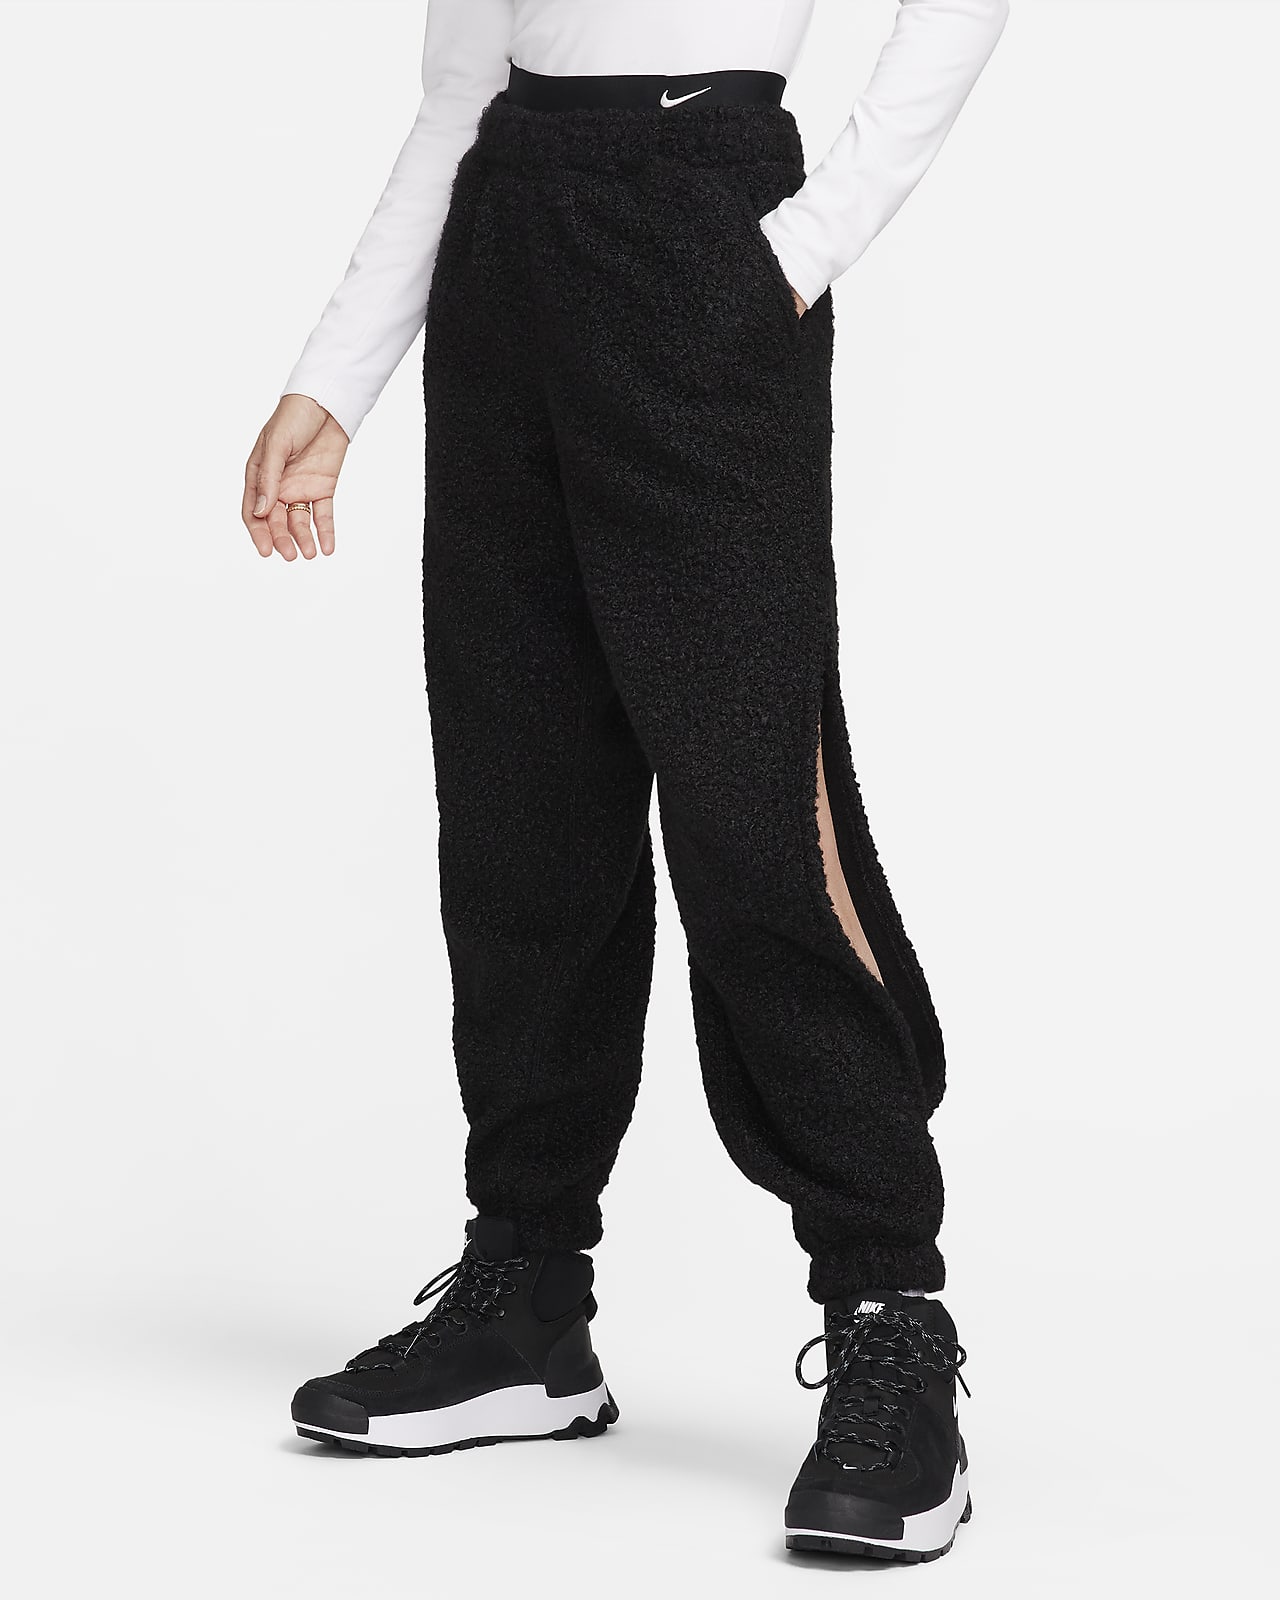 Joggers & Trousers for Women  Made For Movement & Inspired by Dance